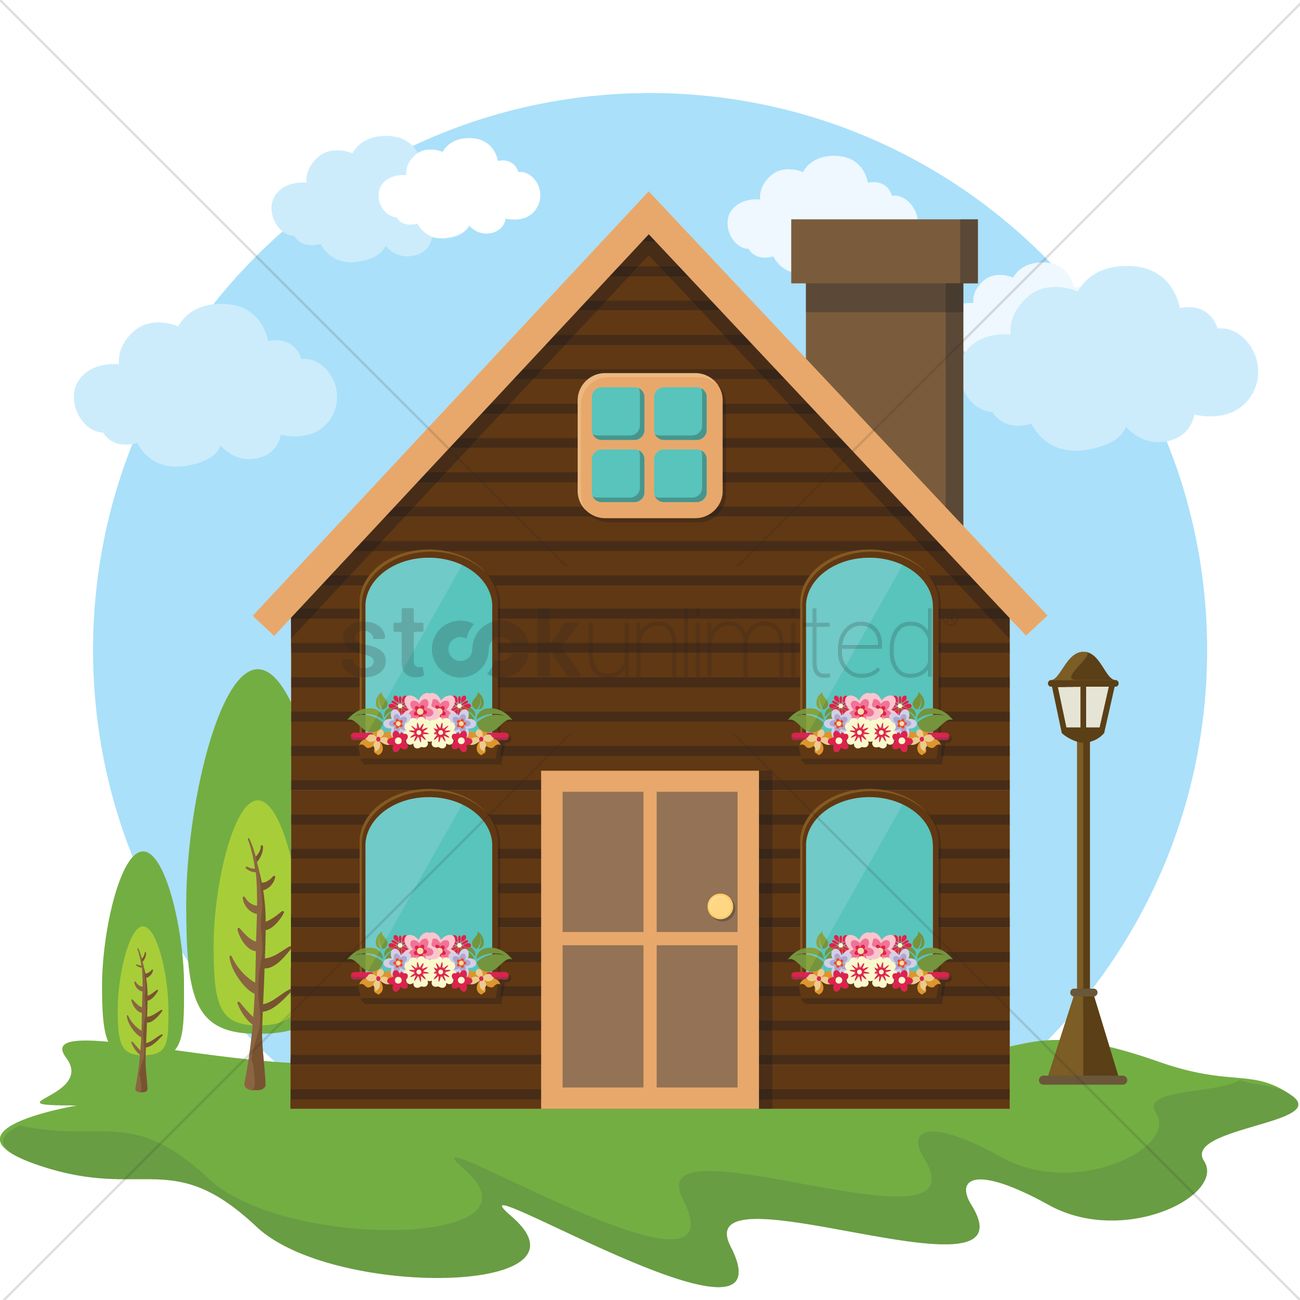 Download wood house with chimney clipart 10 free Cliparts ...